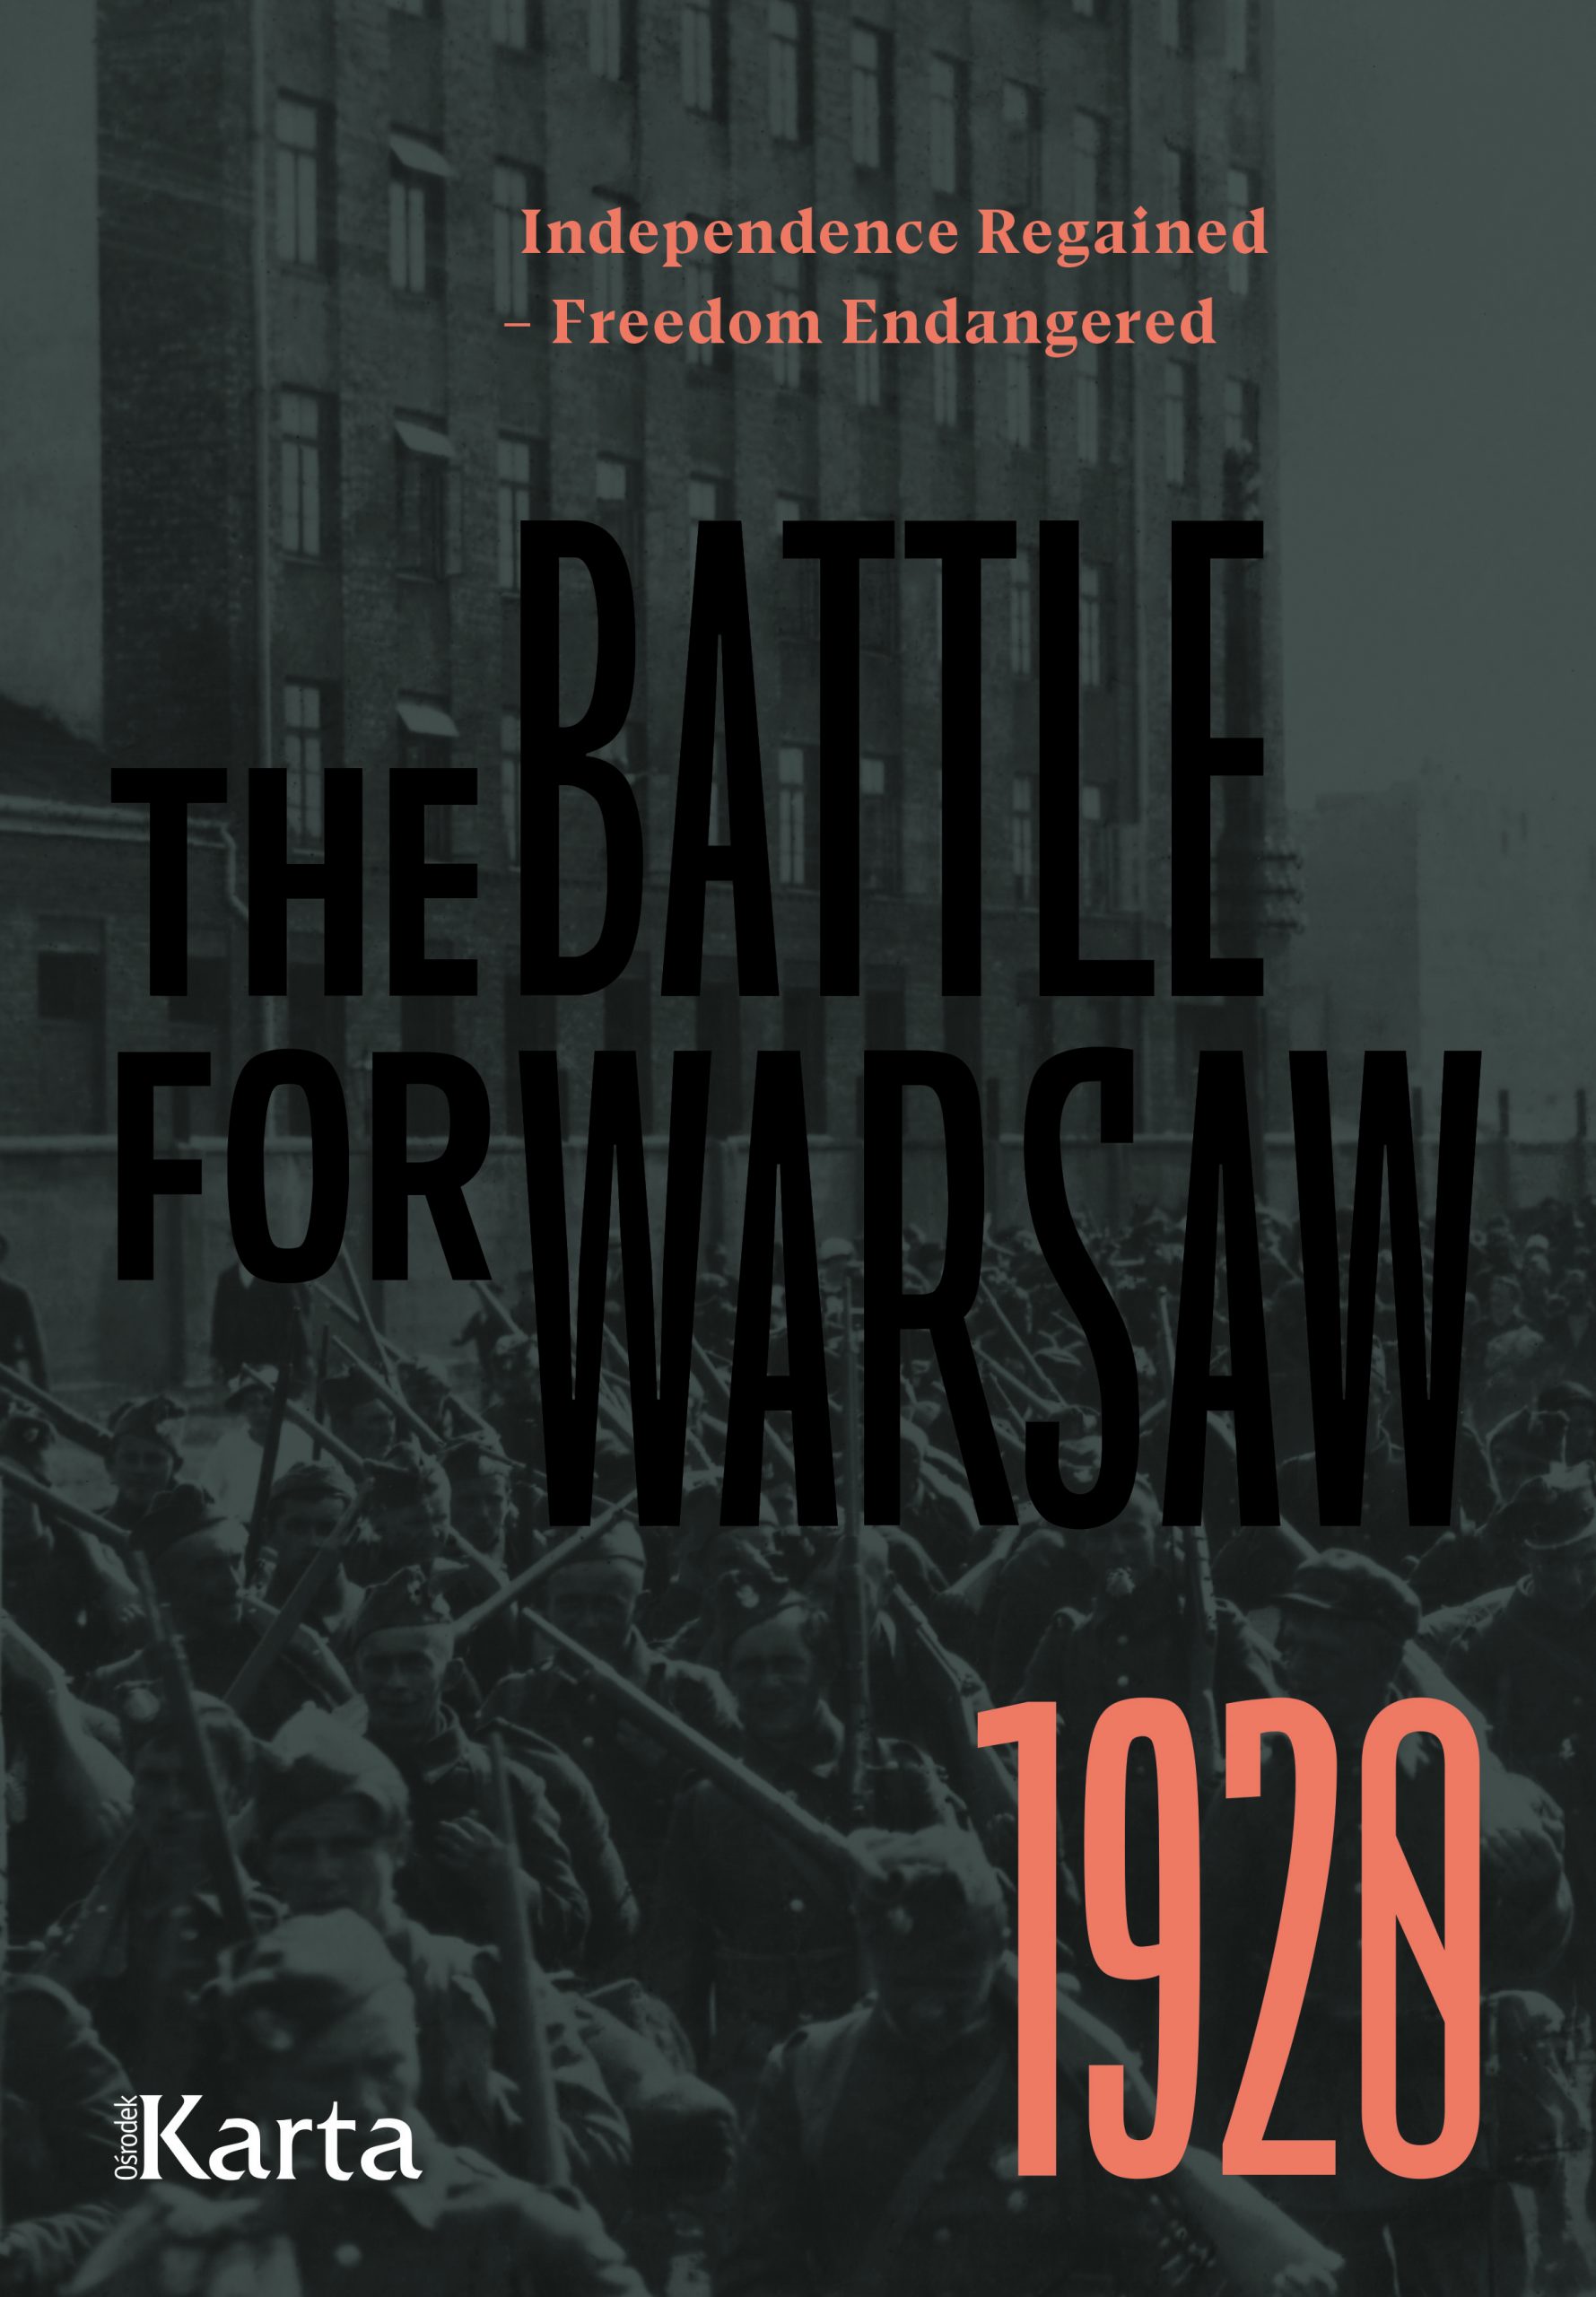 The Battle for Warsaw 1920 (opr.A.Knyt)